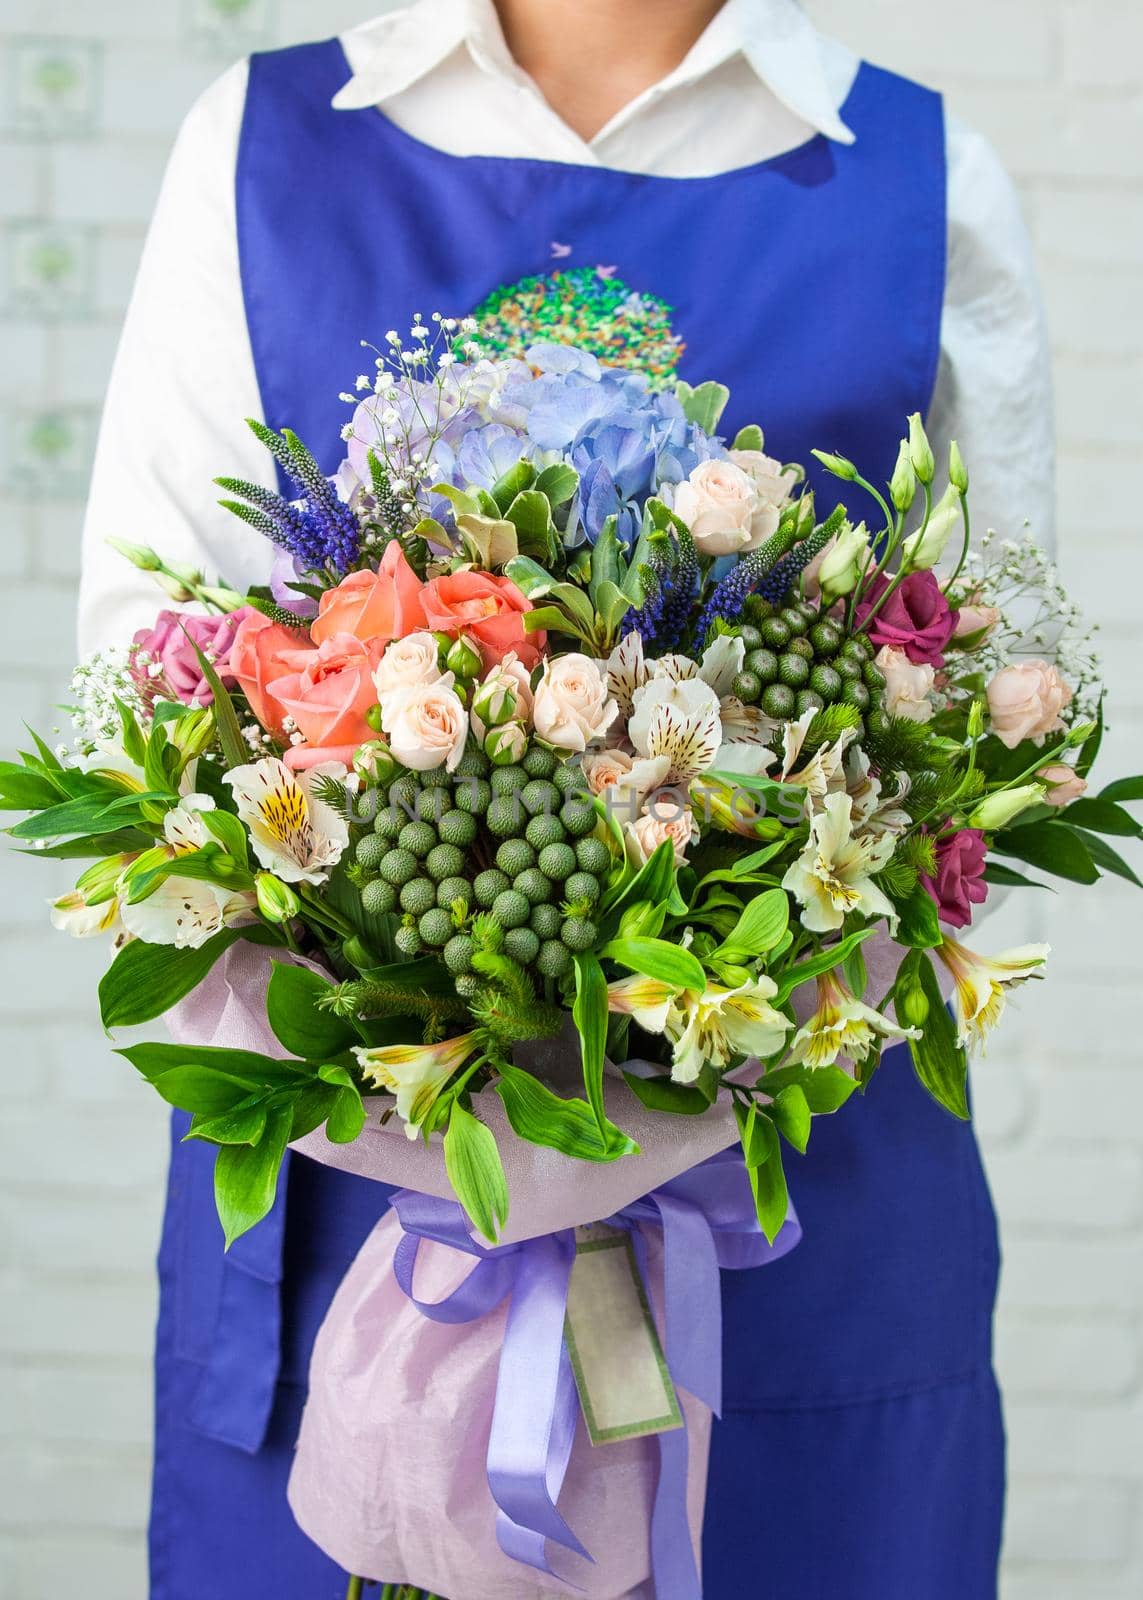 A woman holding a beautiful bouquet with roses, lisianthus, alstroemeria, and hortensia